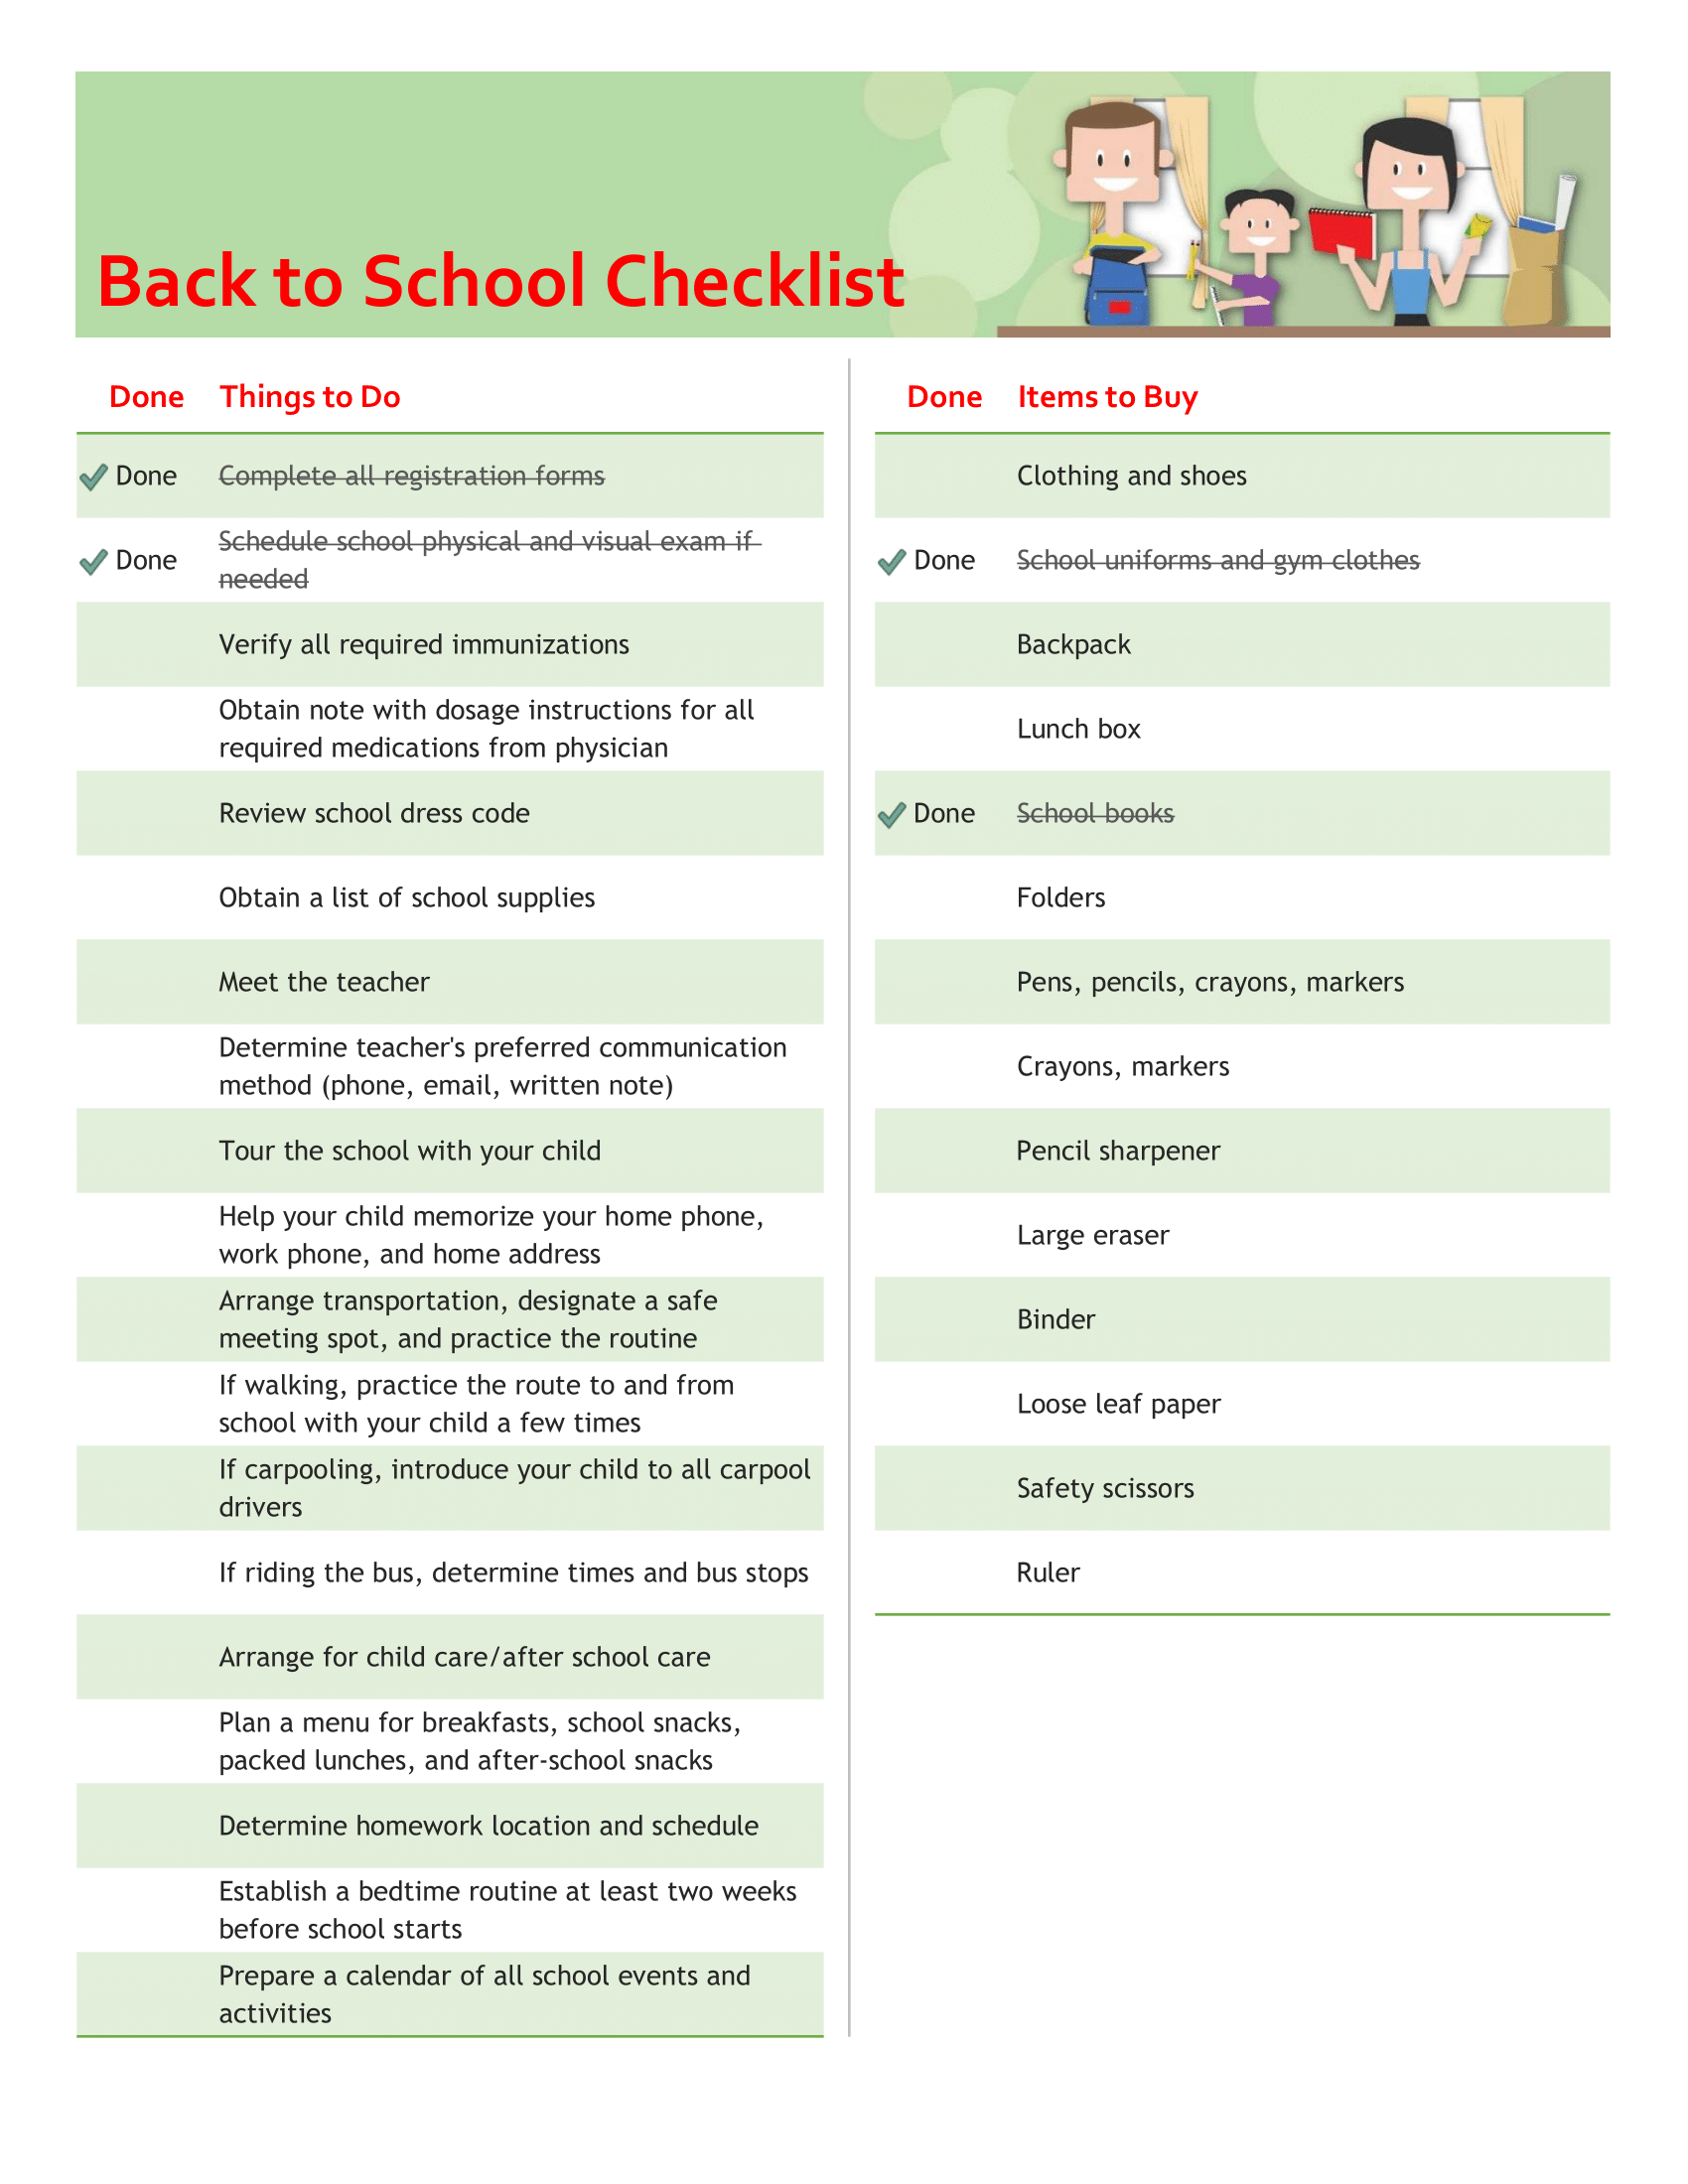 Back to School Basic List Excel Template for Teachers Students and Parents.